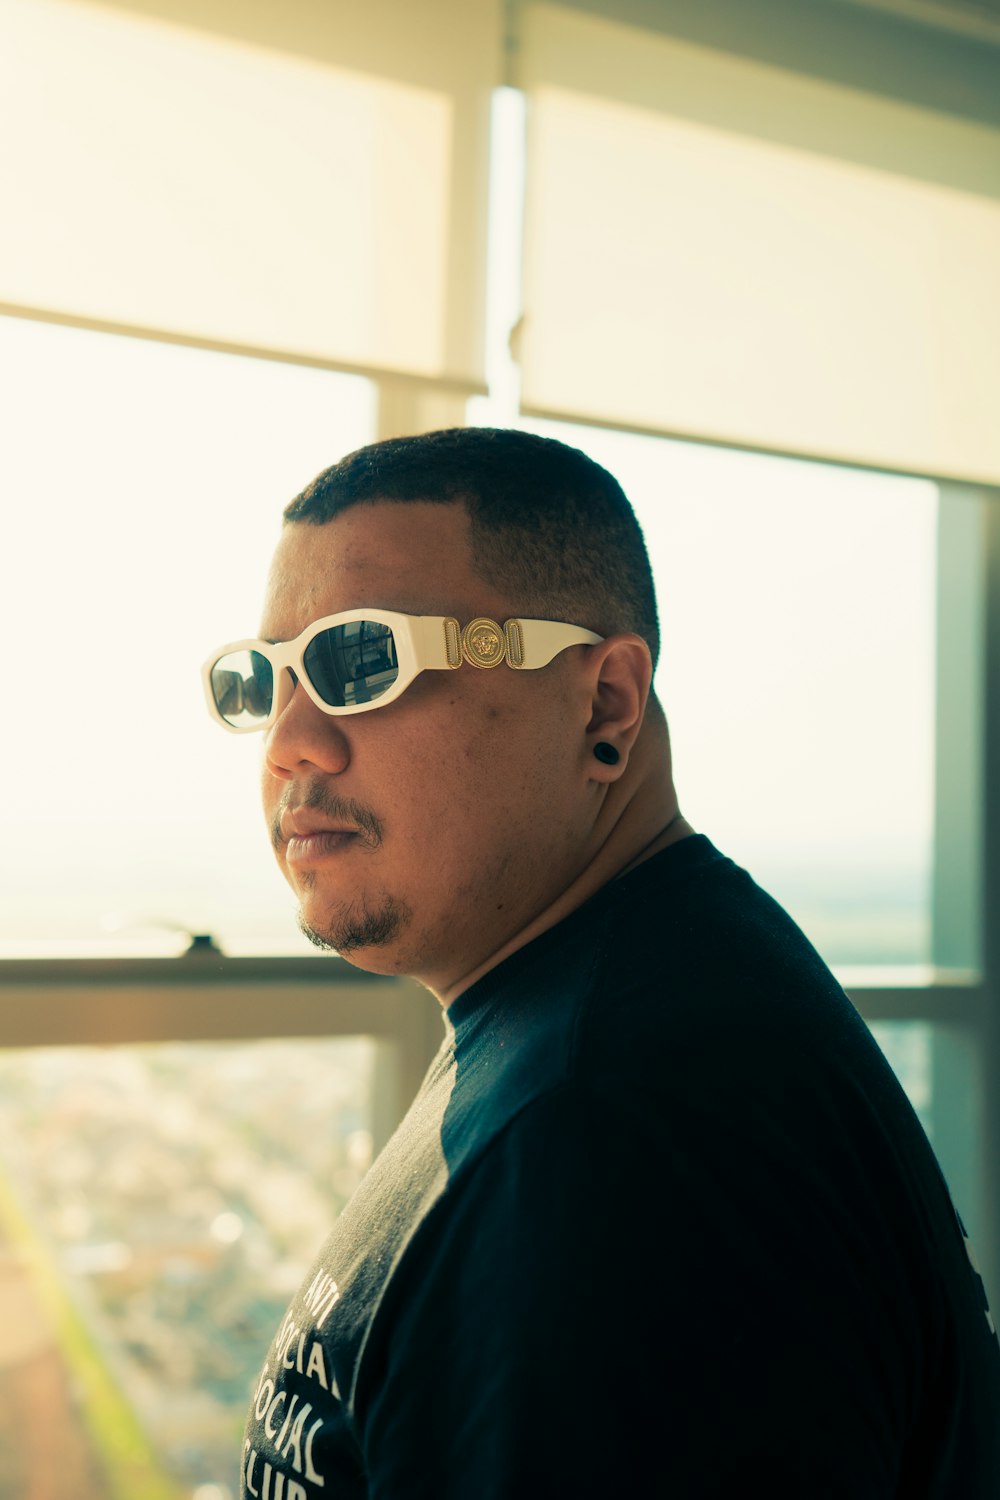 A man wearing sunglasses looking out a window photo – Free Sunglasses Image  on Unsplash